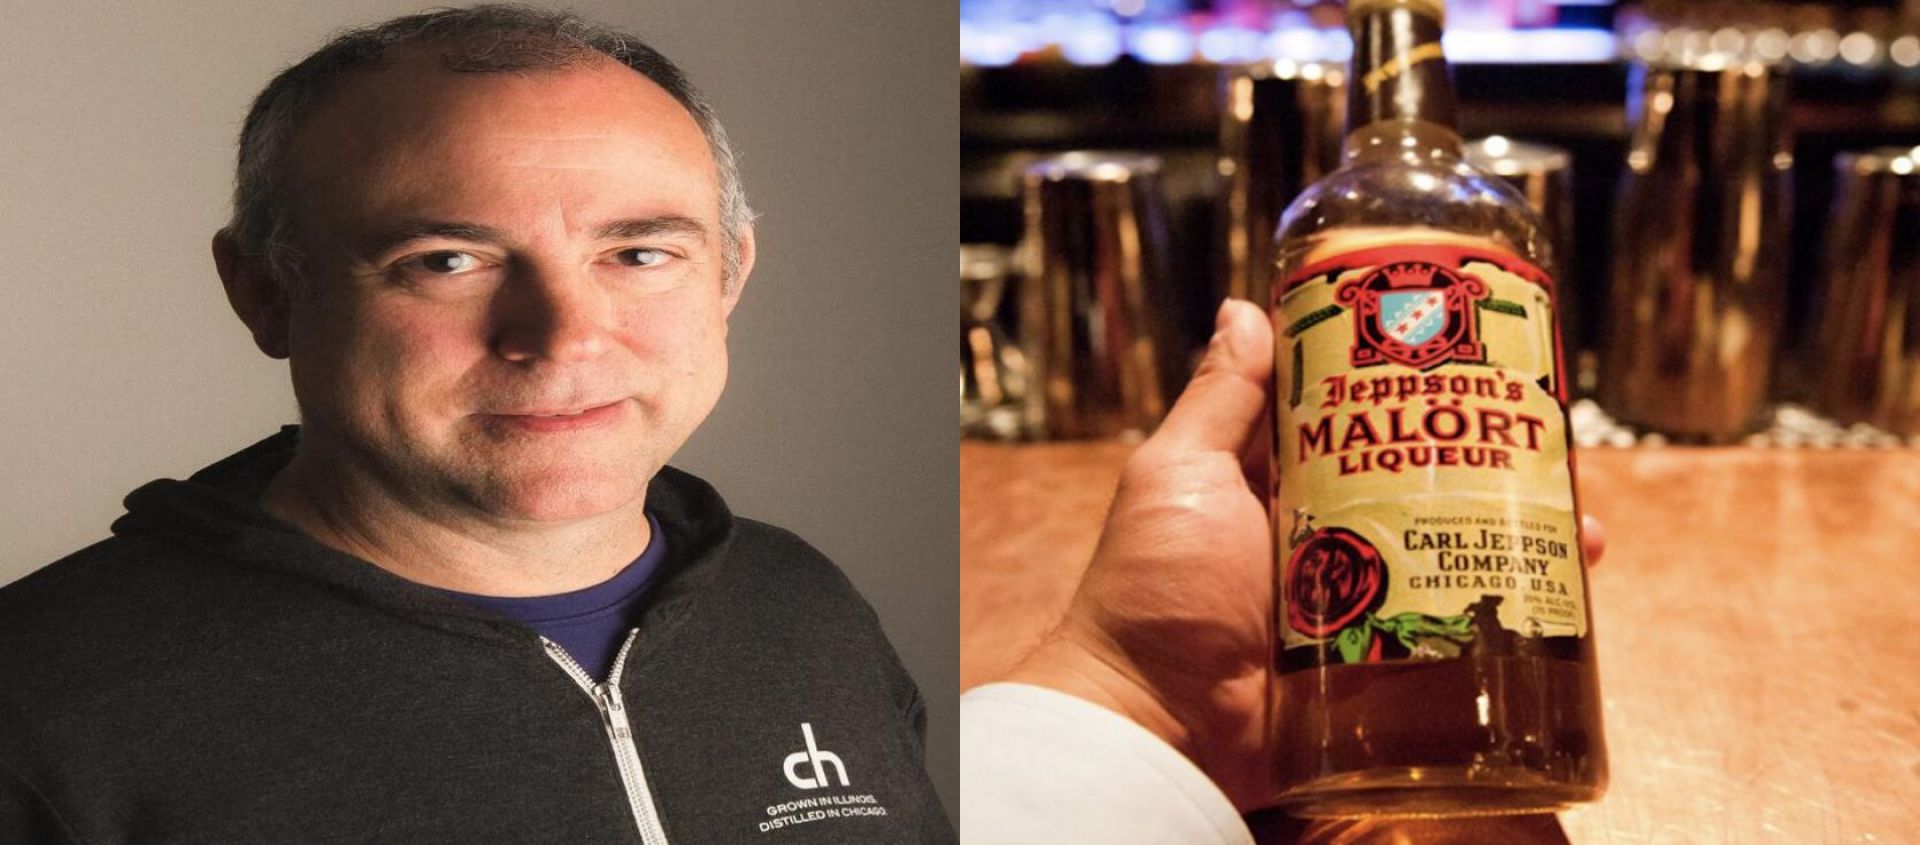 Photo for: CH Distillery's CEO Tremaine Atkinson, owners of Jeppson's Malört, to speak at USA Trade Tasting